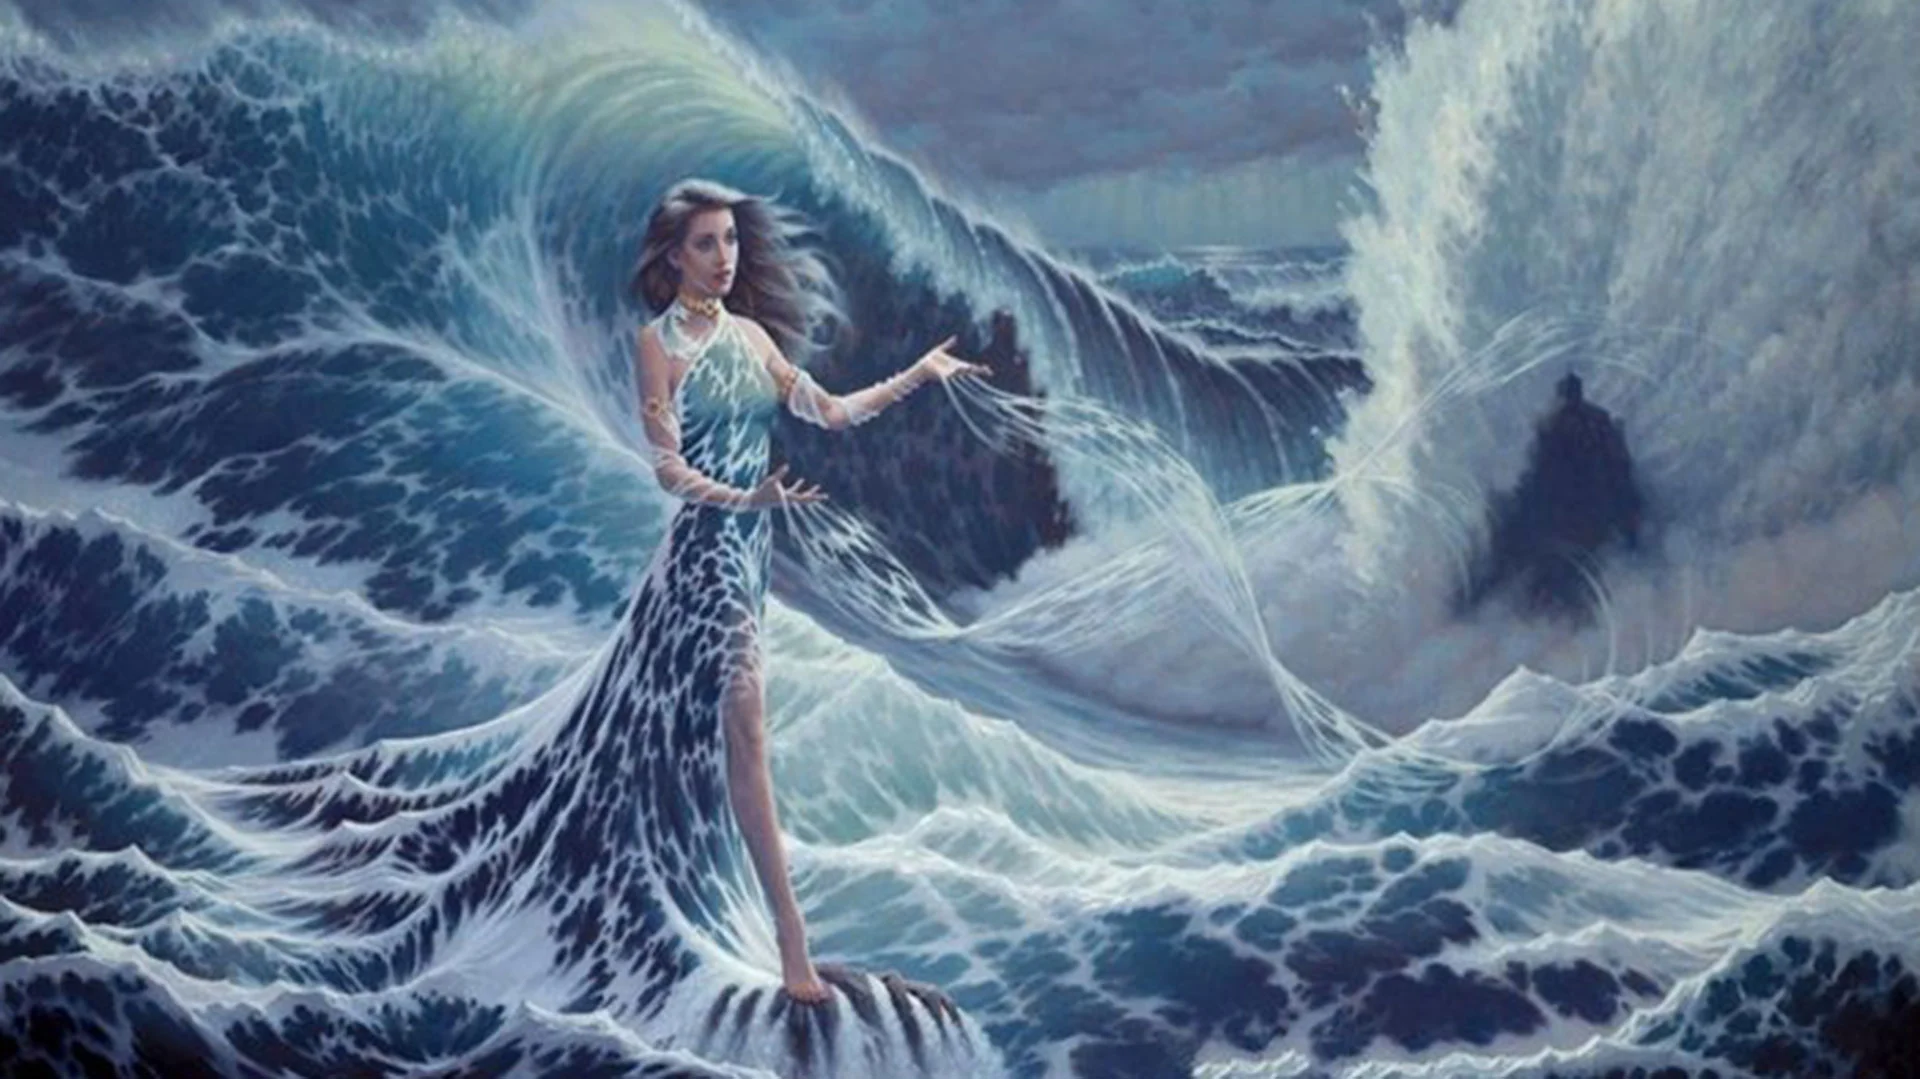 All About Mythological Water Spirits and Ocean Deities - The